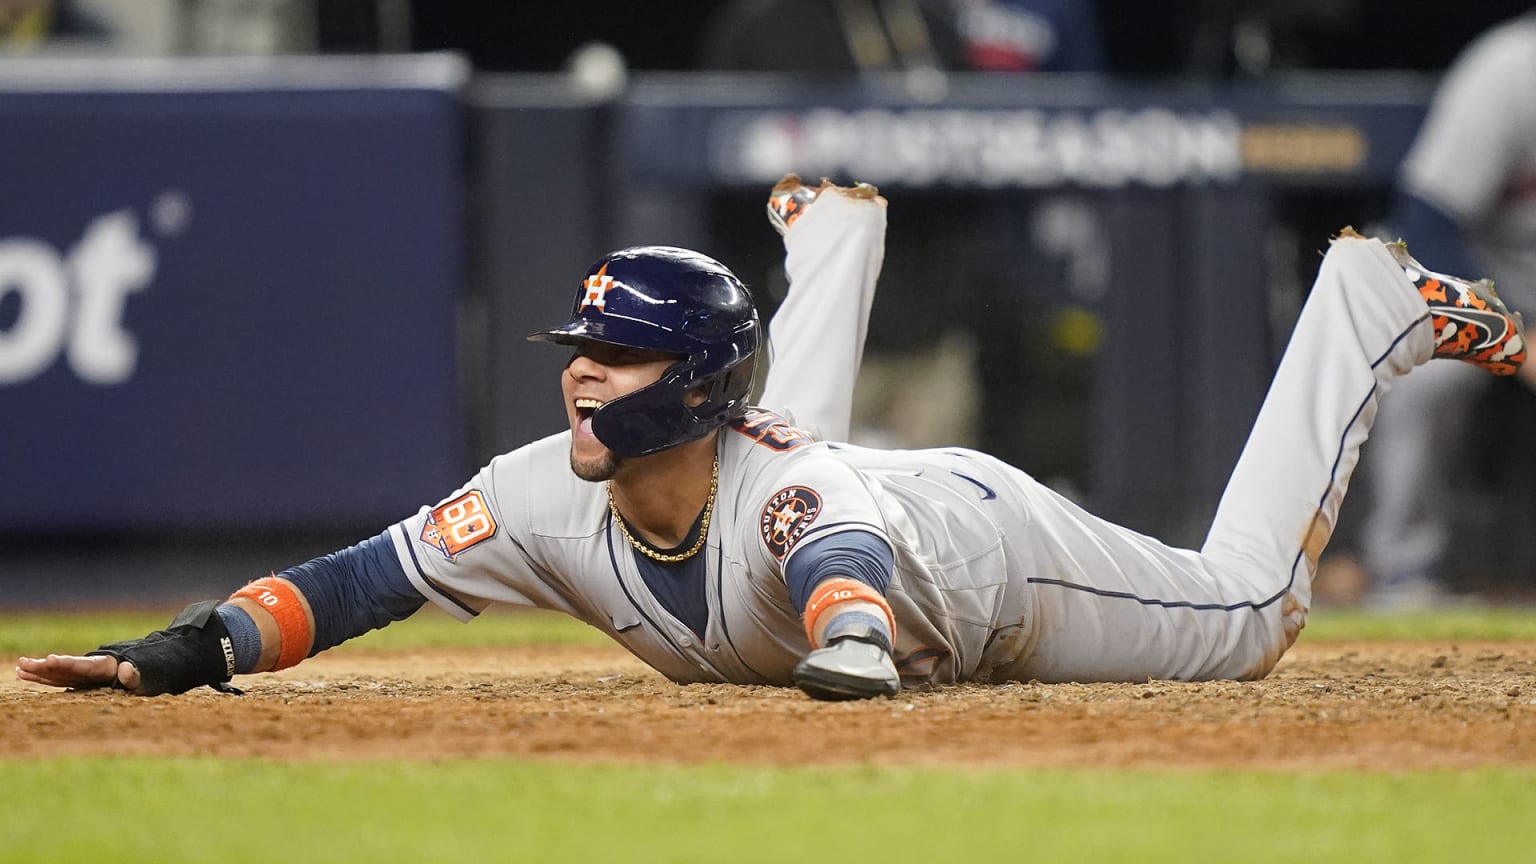 An Astros player is happily splayed out on his stomach after sliding home to score a run